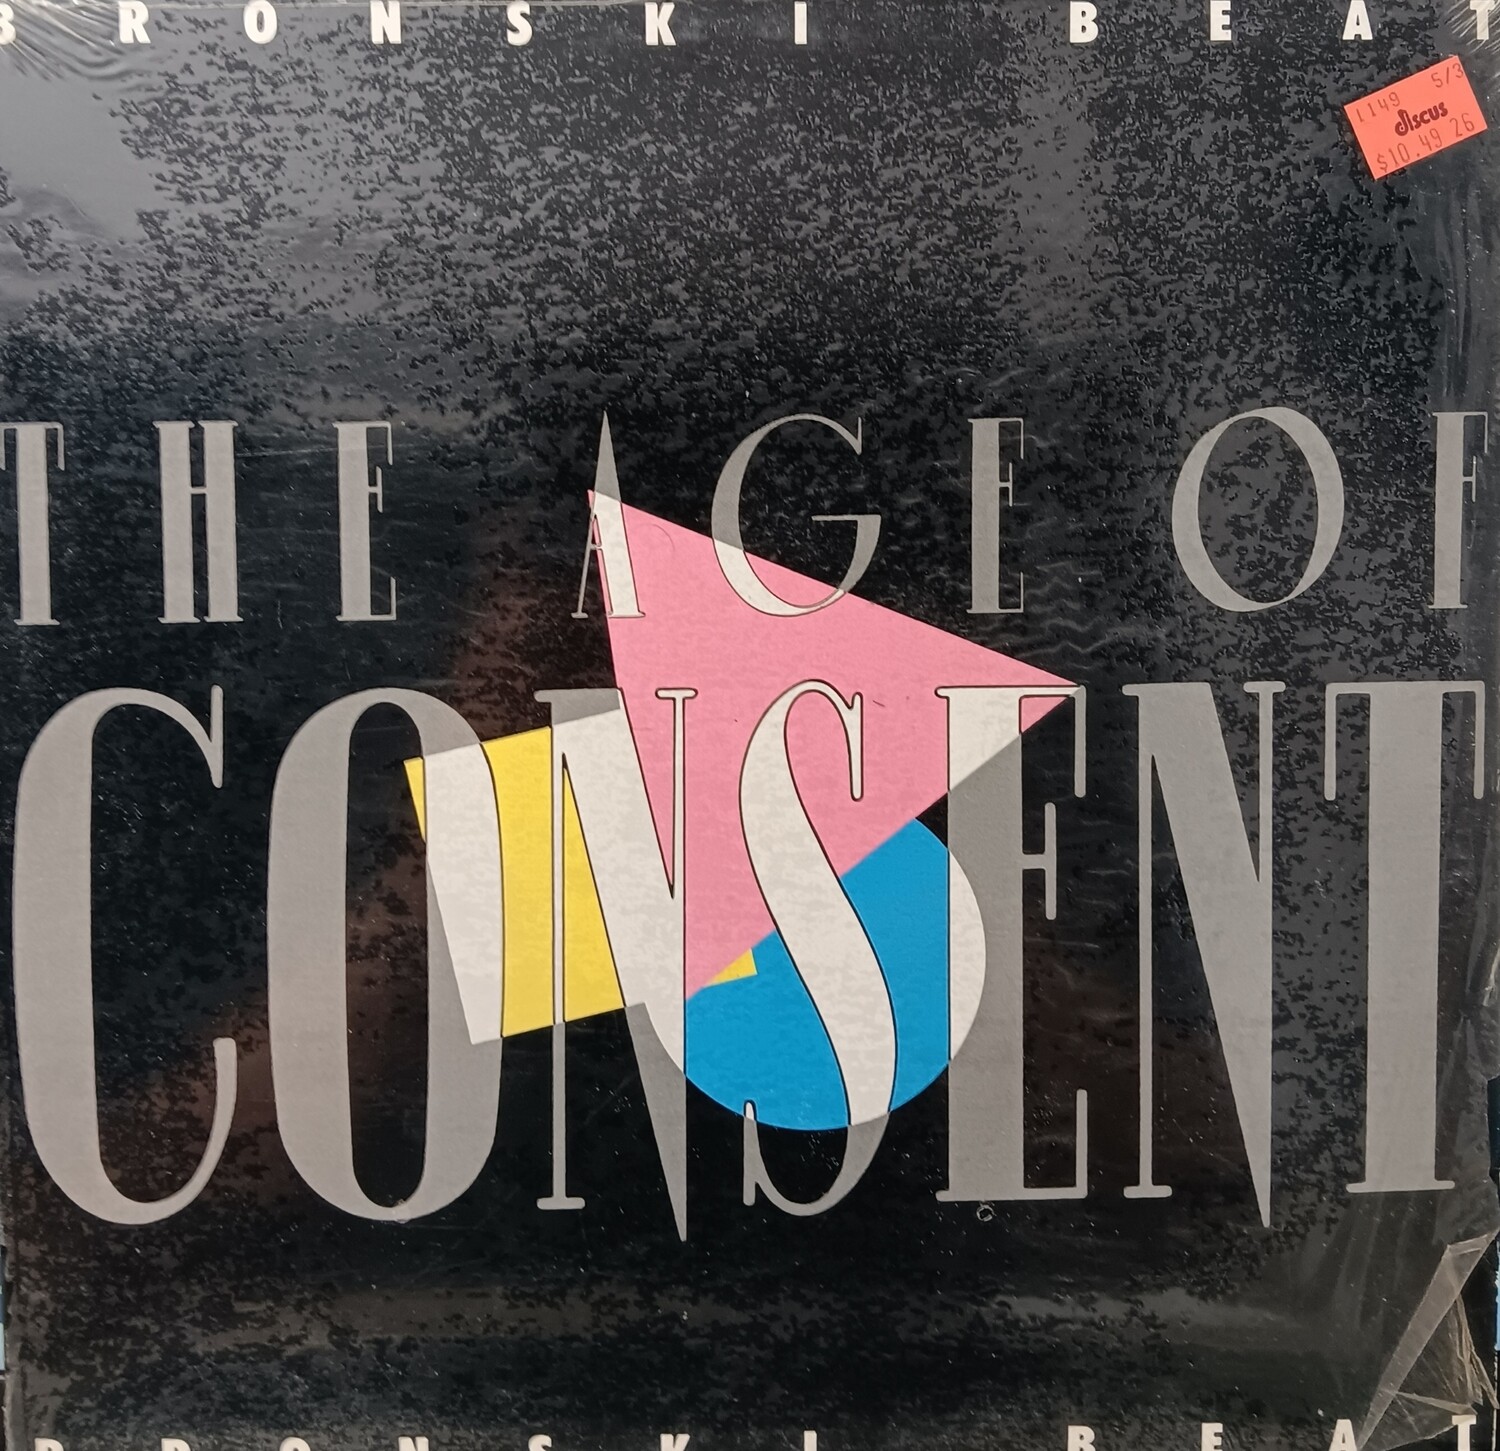 BRONSKI BEAT - The age of consent